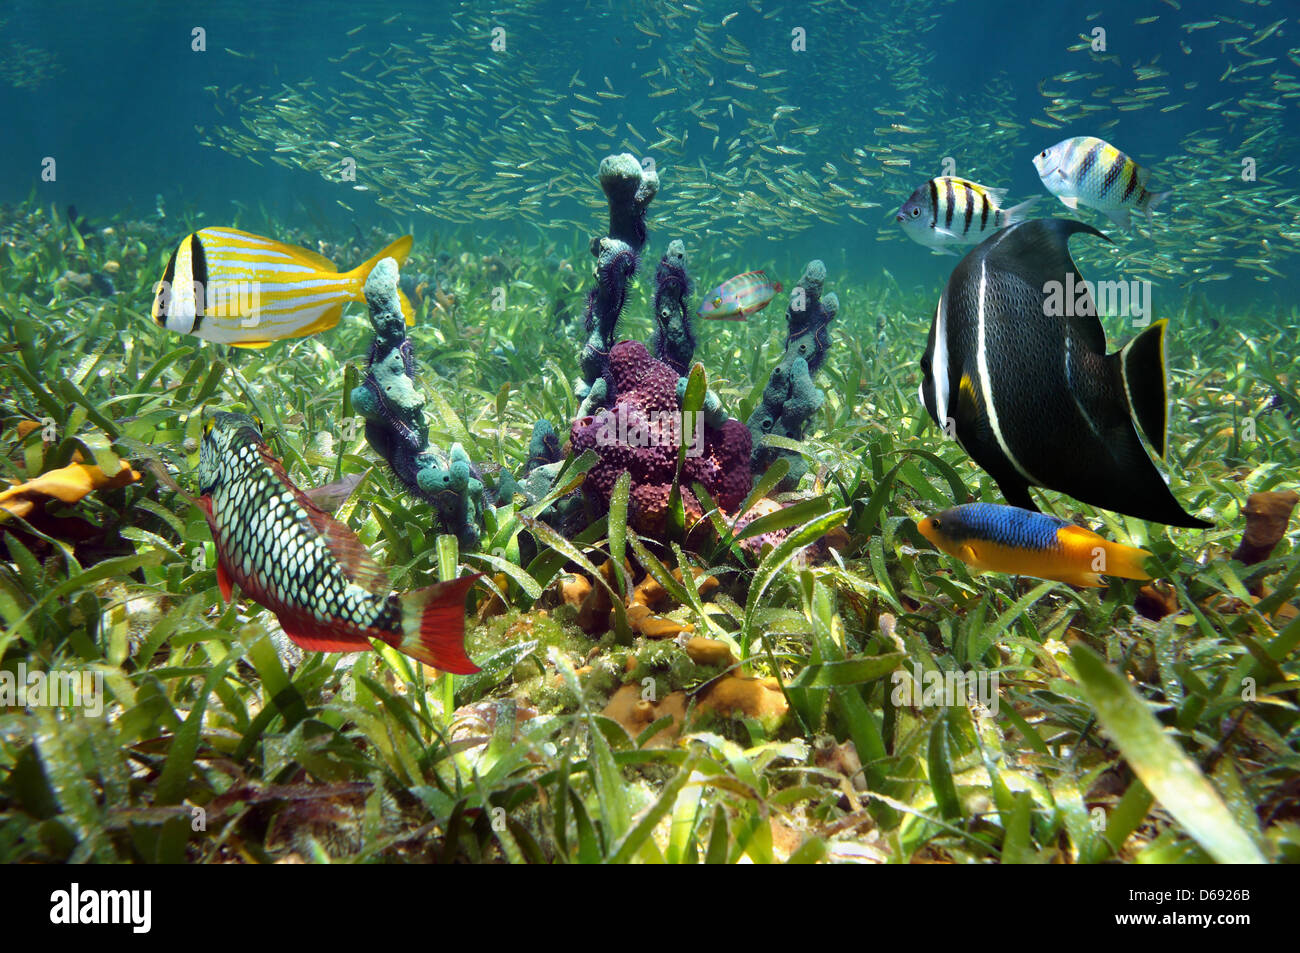 Colorful sea sponges and tropical fish in shallow seabed of turtle grass Stock Photo